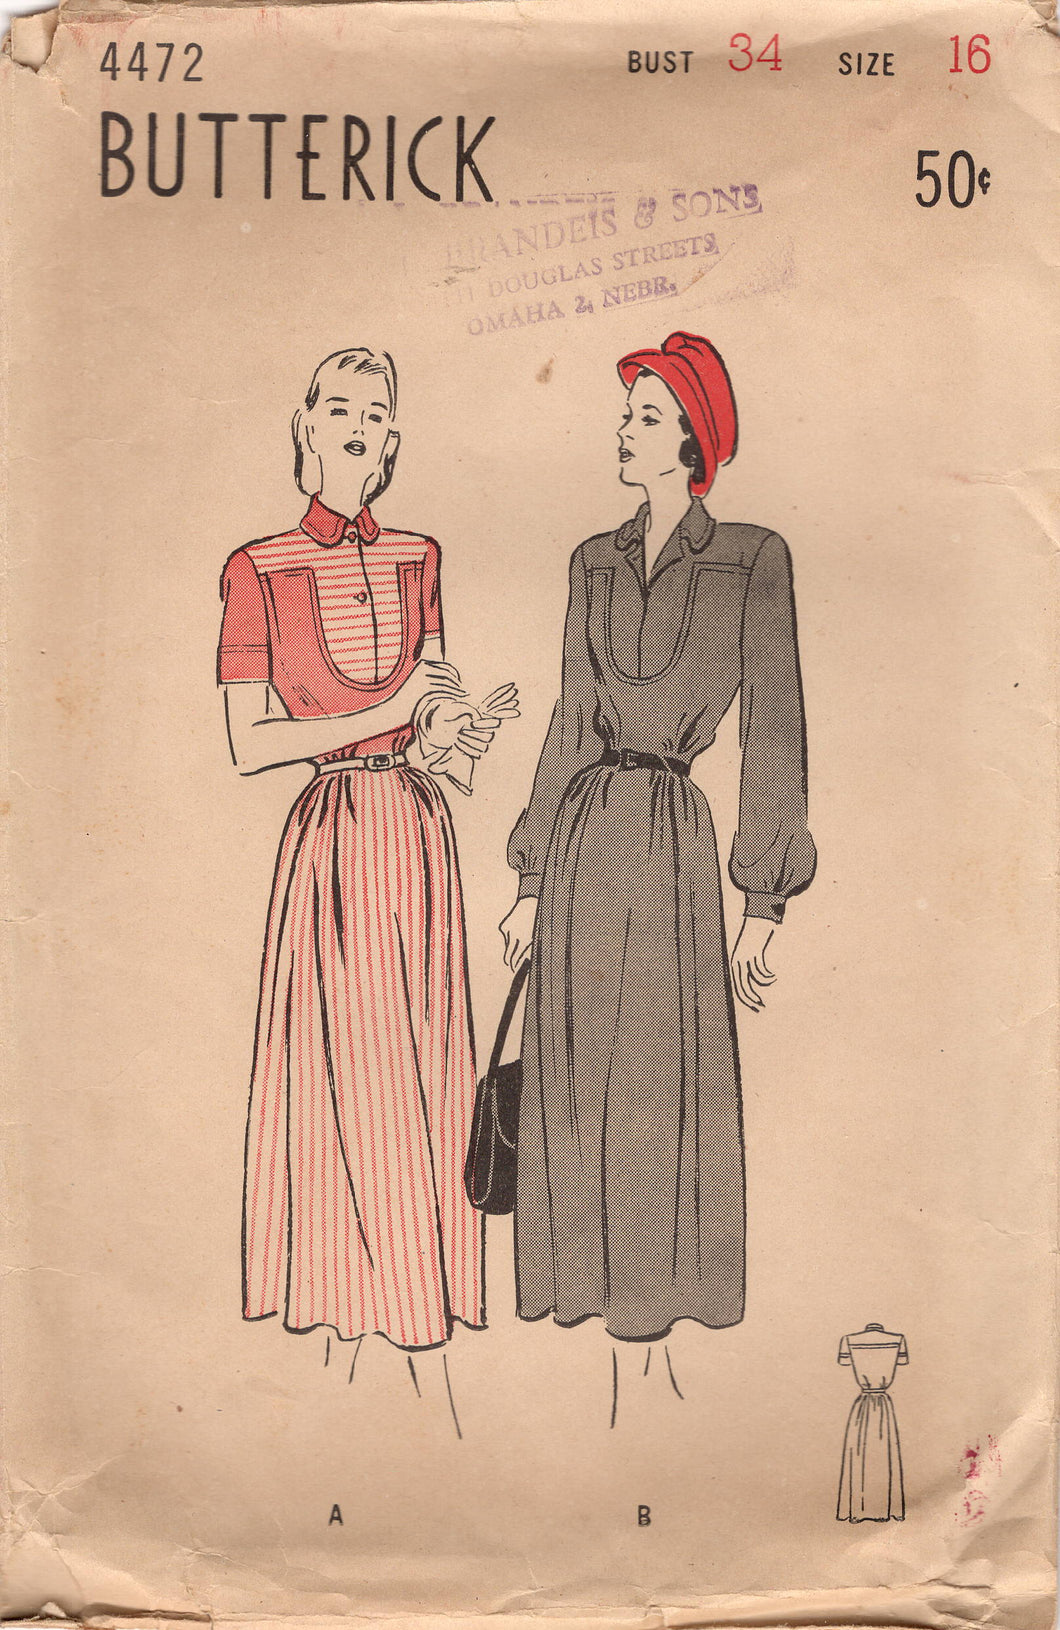 1940's Butterick One Piece Dress Pattern with Large Yoke and Collar - Bust 34